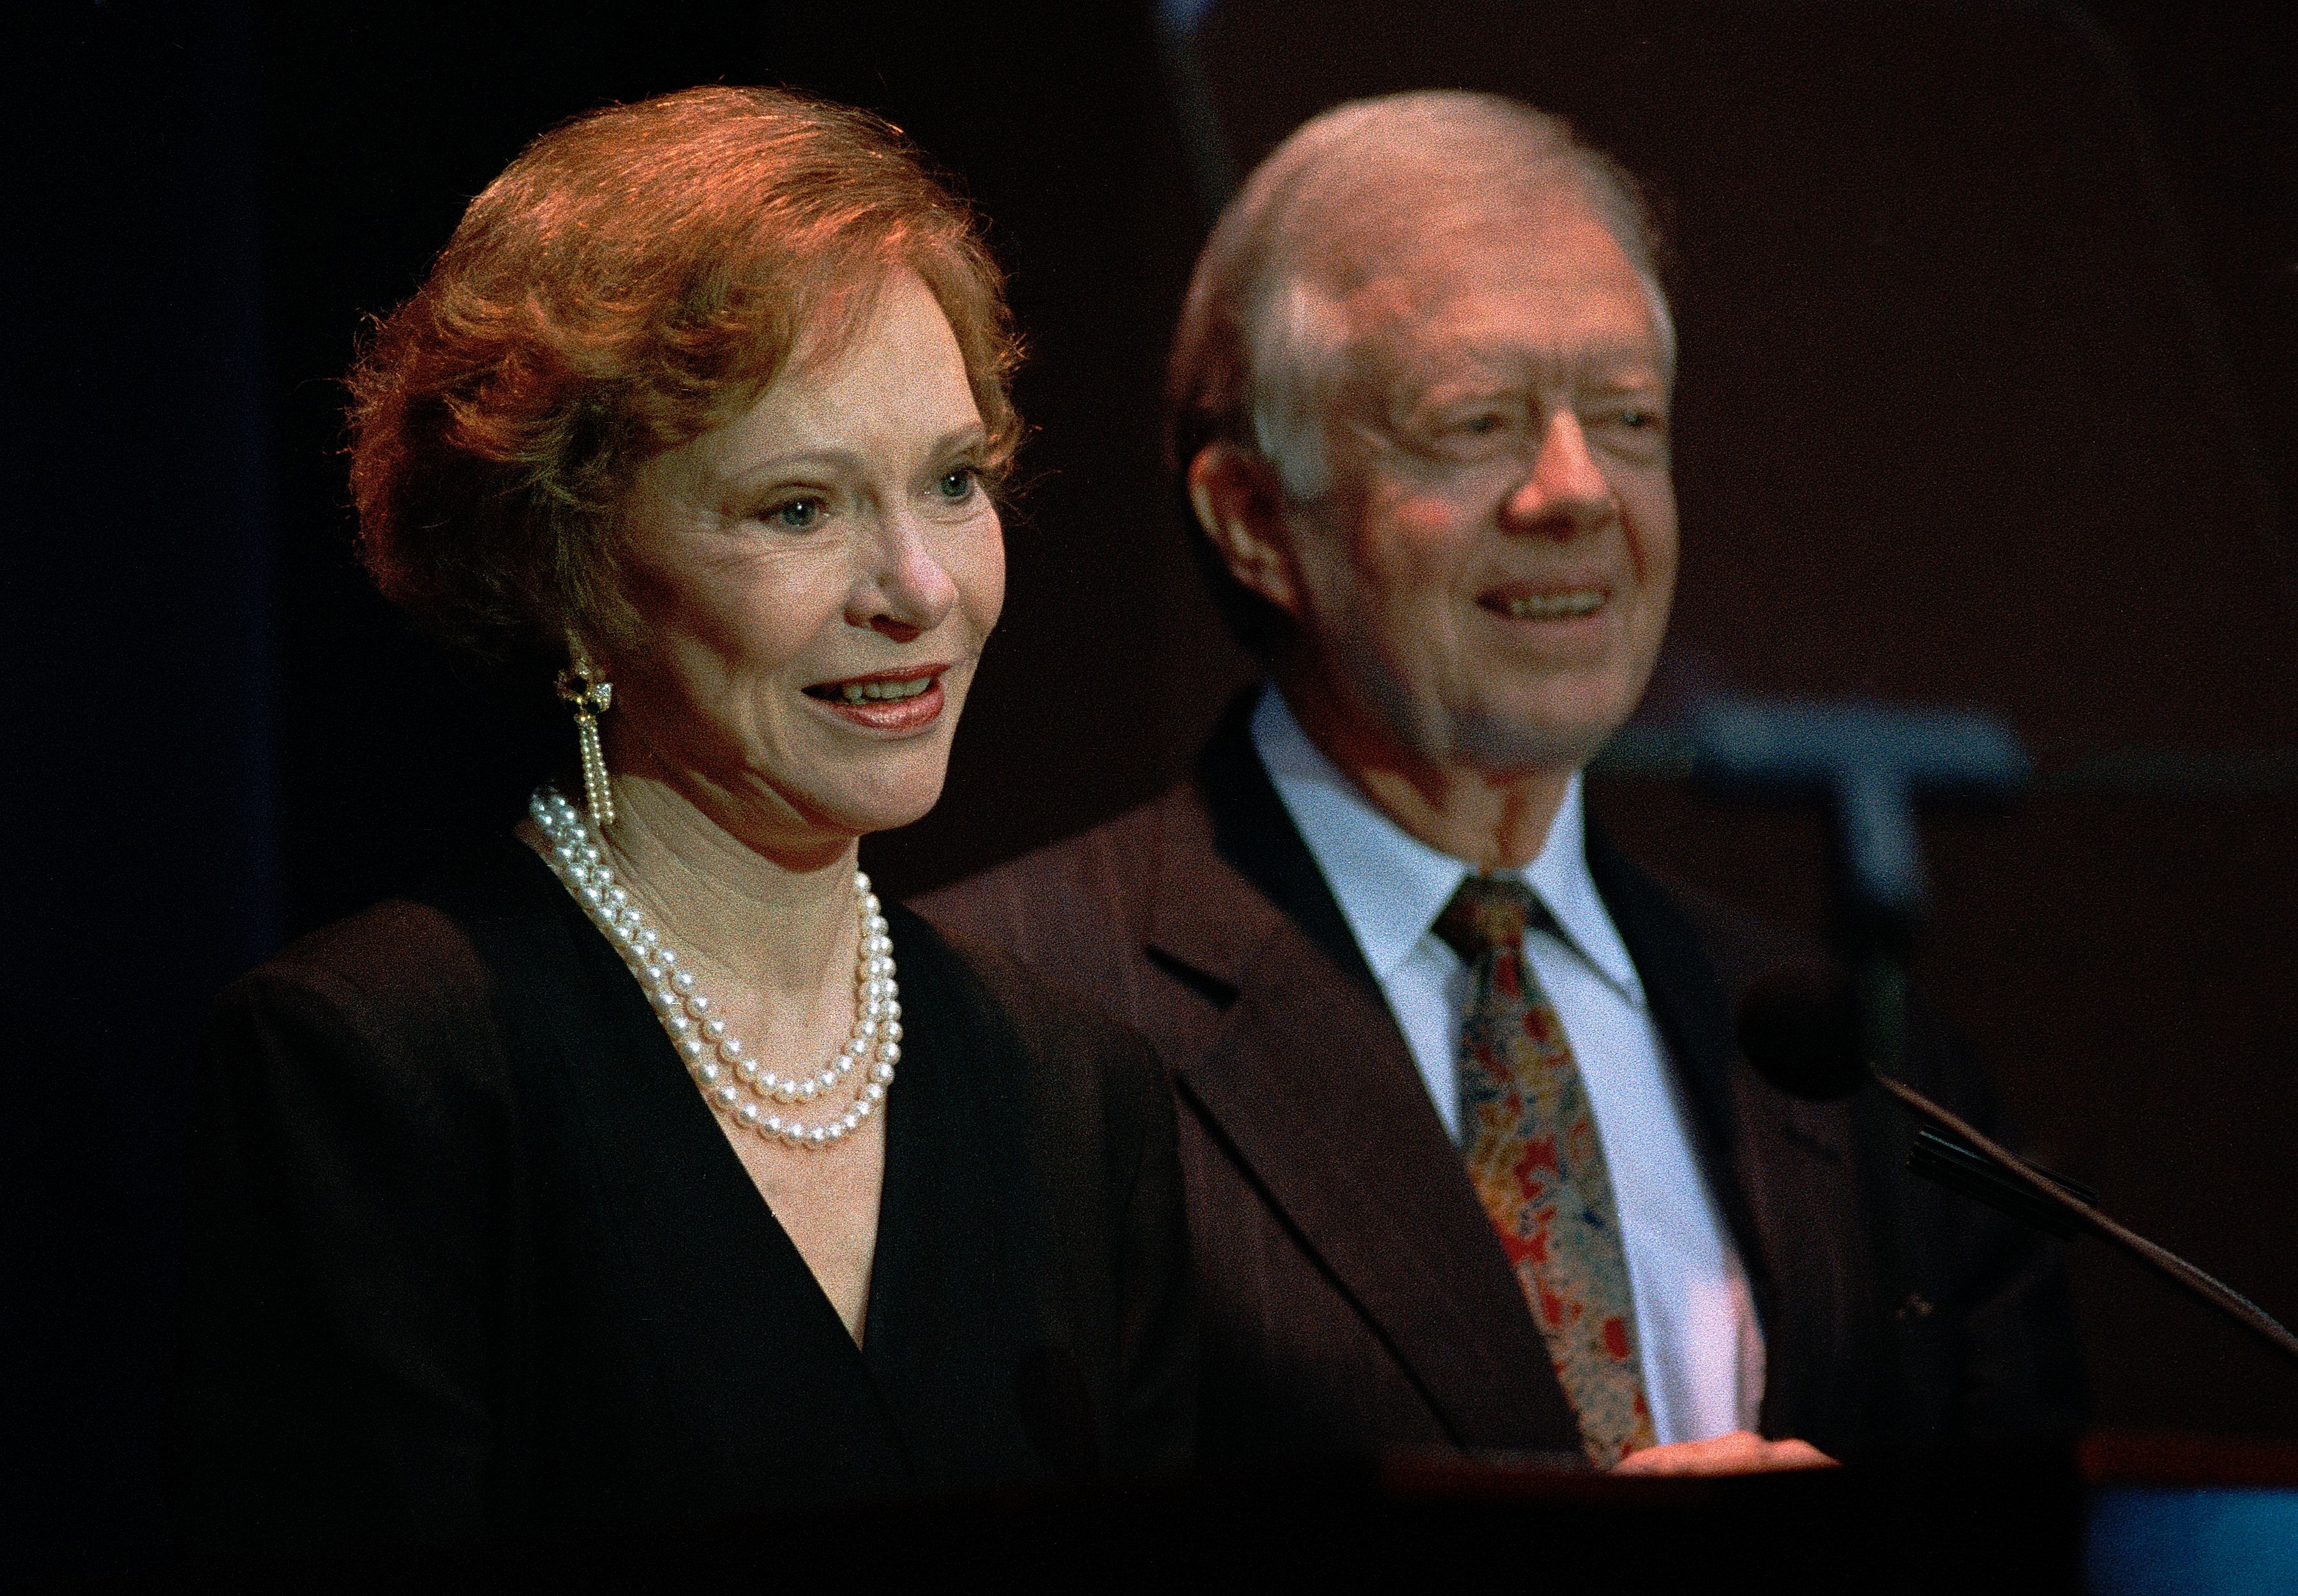 Rosalynn Carter and Jimmy Carter during the former president's surprise 70th birthday party at The Carter Presidential Center in Atlanta Georgia in October 1994 | Source: Getty Images